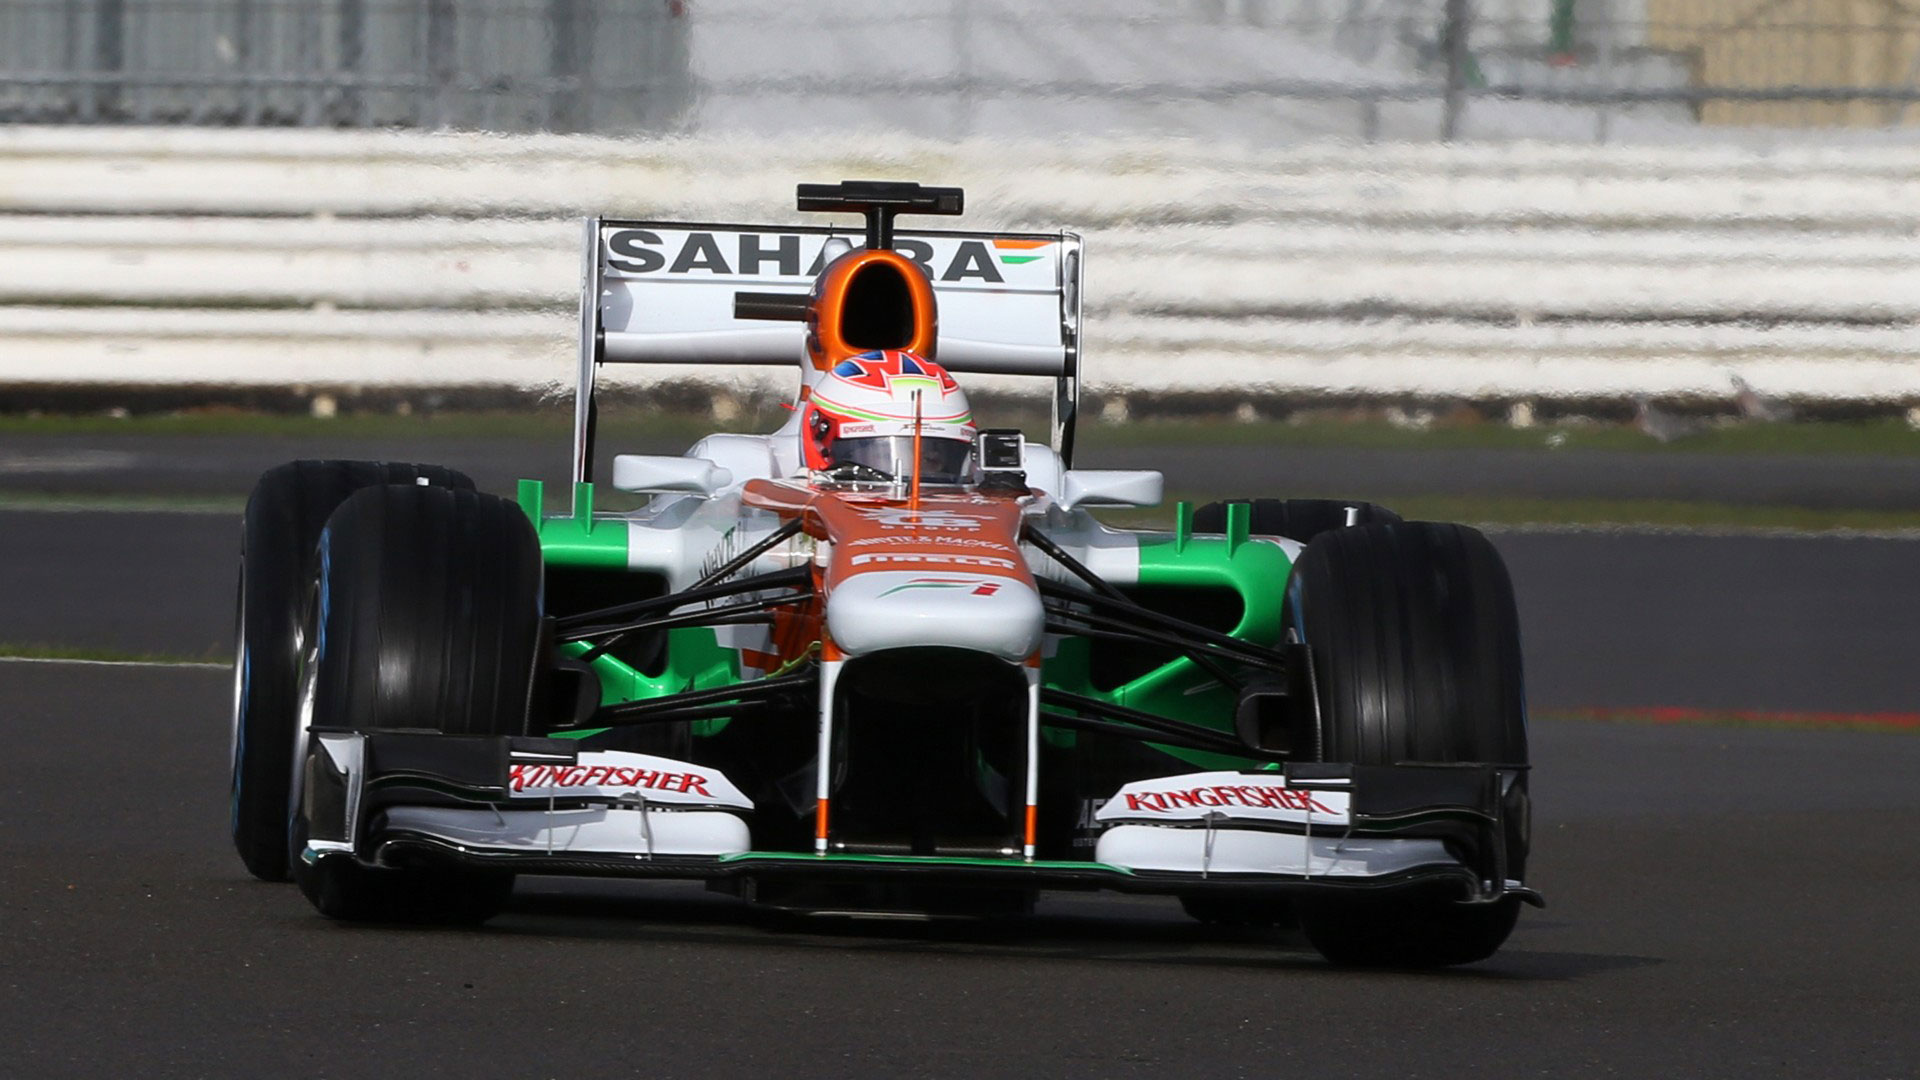 HD Pictures Launch Force India Vjm06 F1 Car Fansite